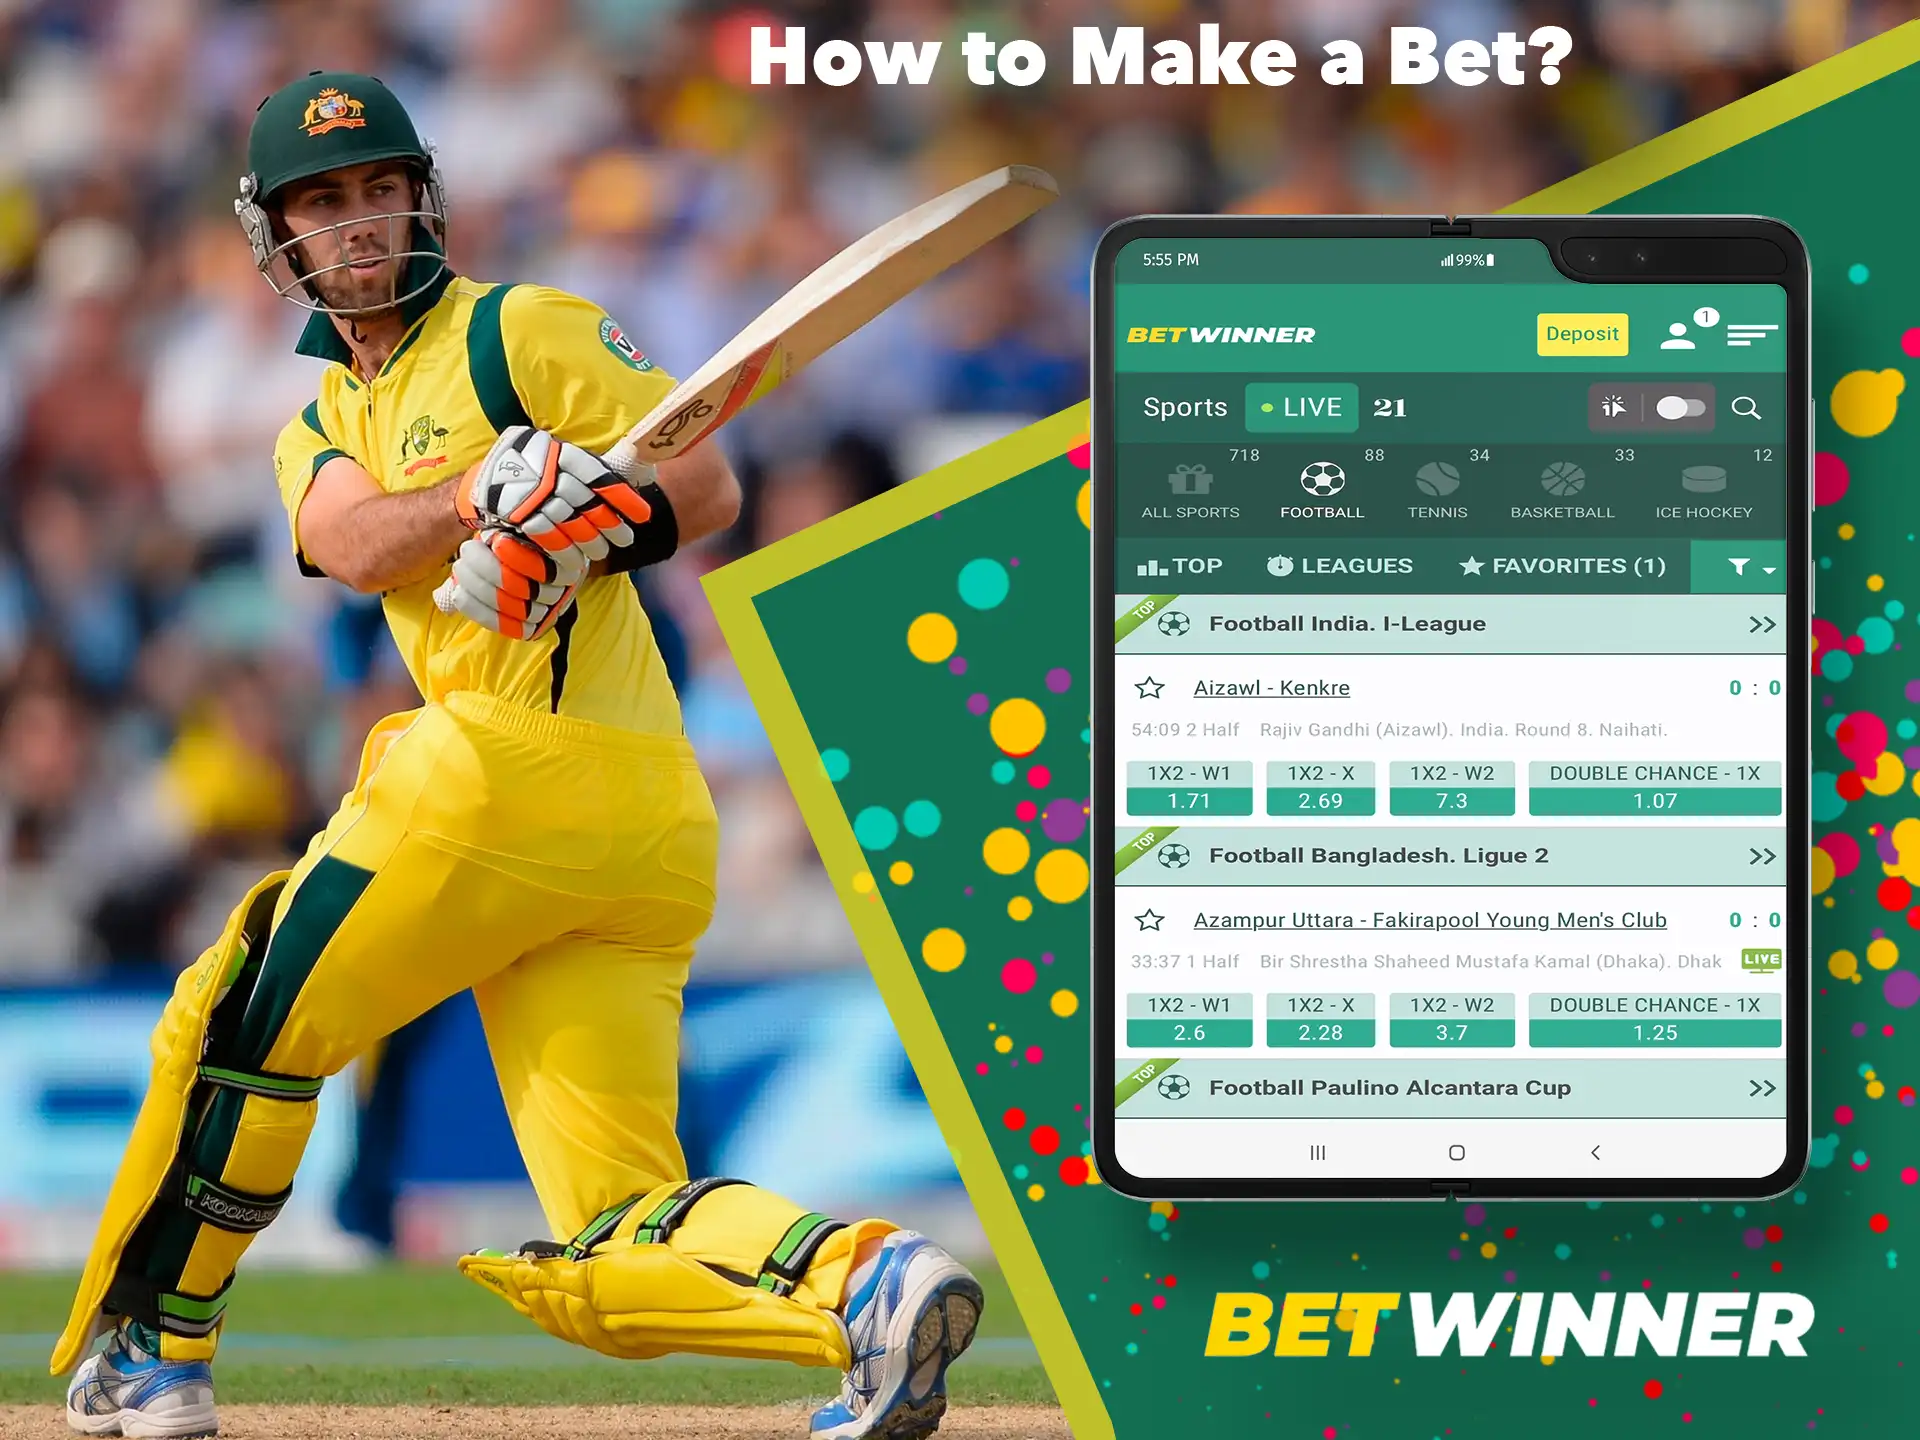 Instruction for placing a bet in the betwinner app.